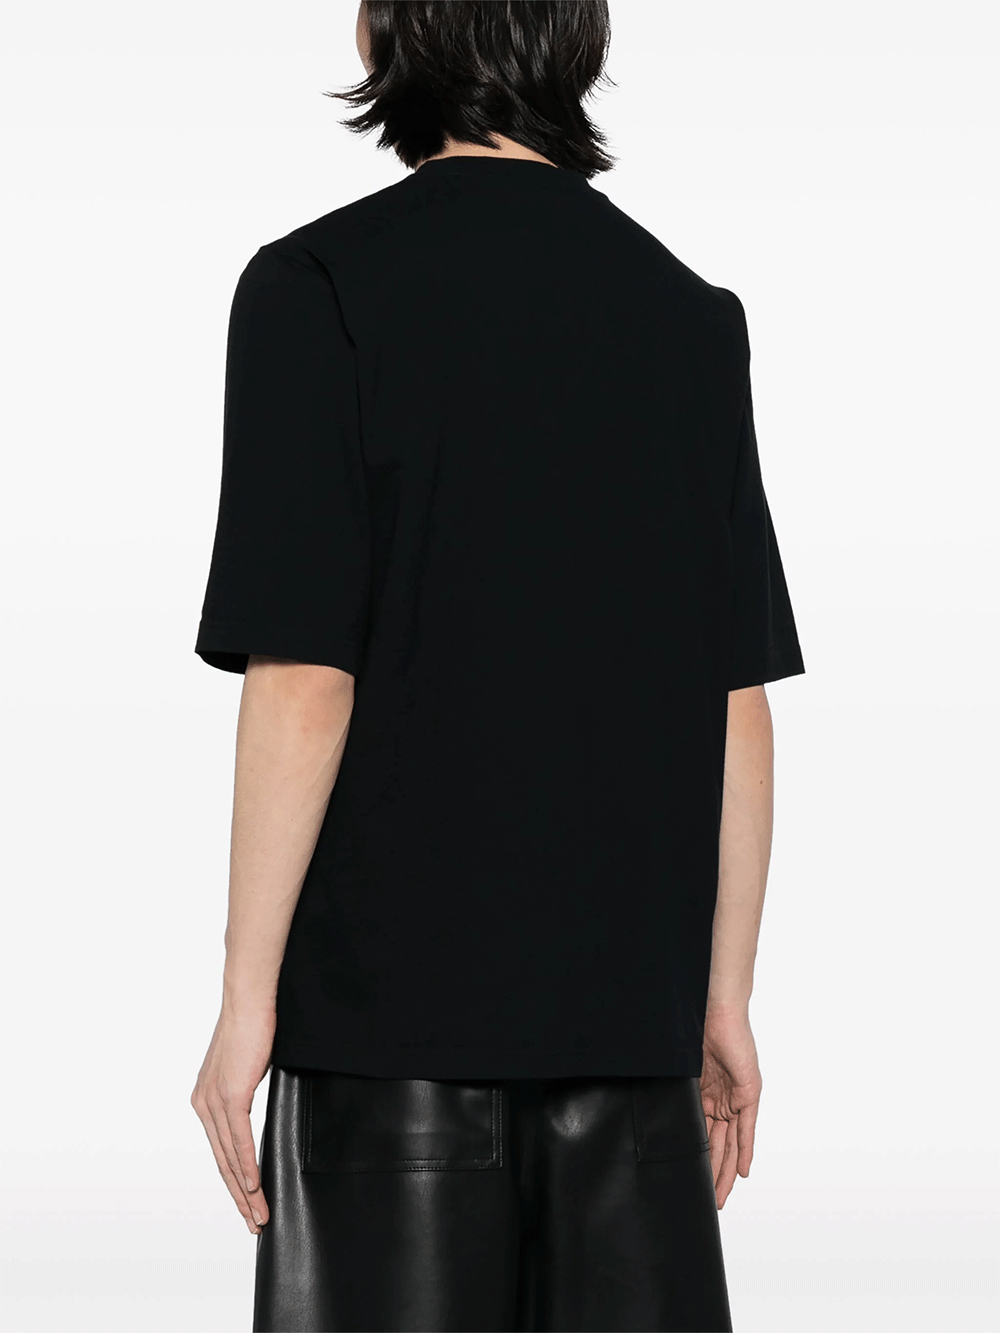 We11done-Black-Overdyed-Loose-Fit-T-Shirt-Black-4